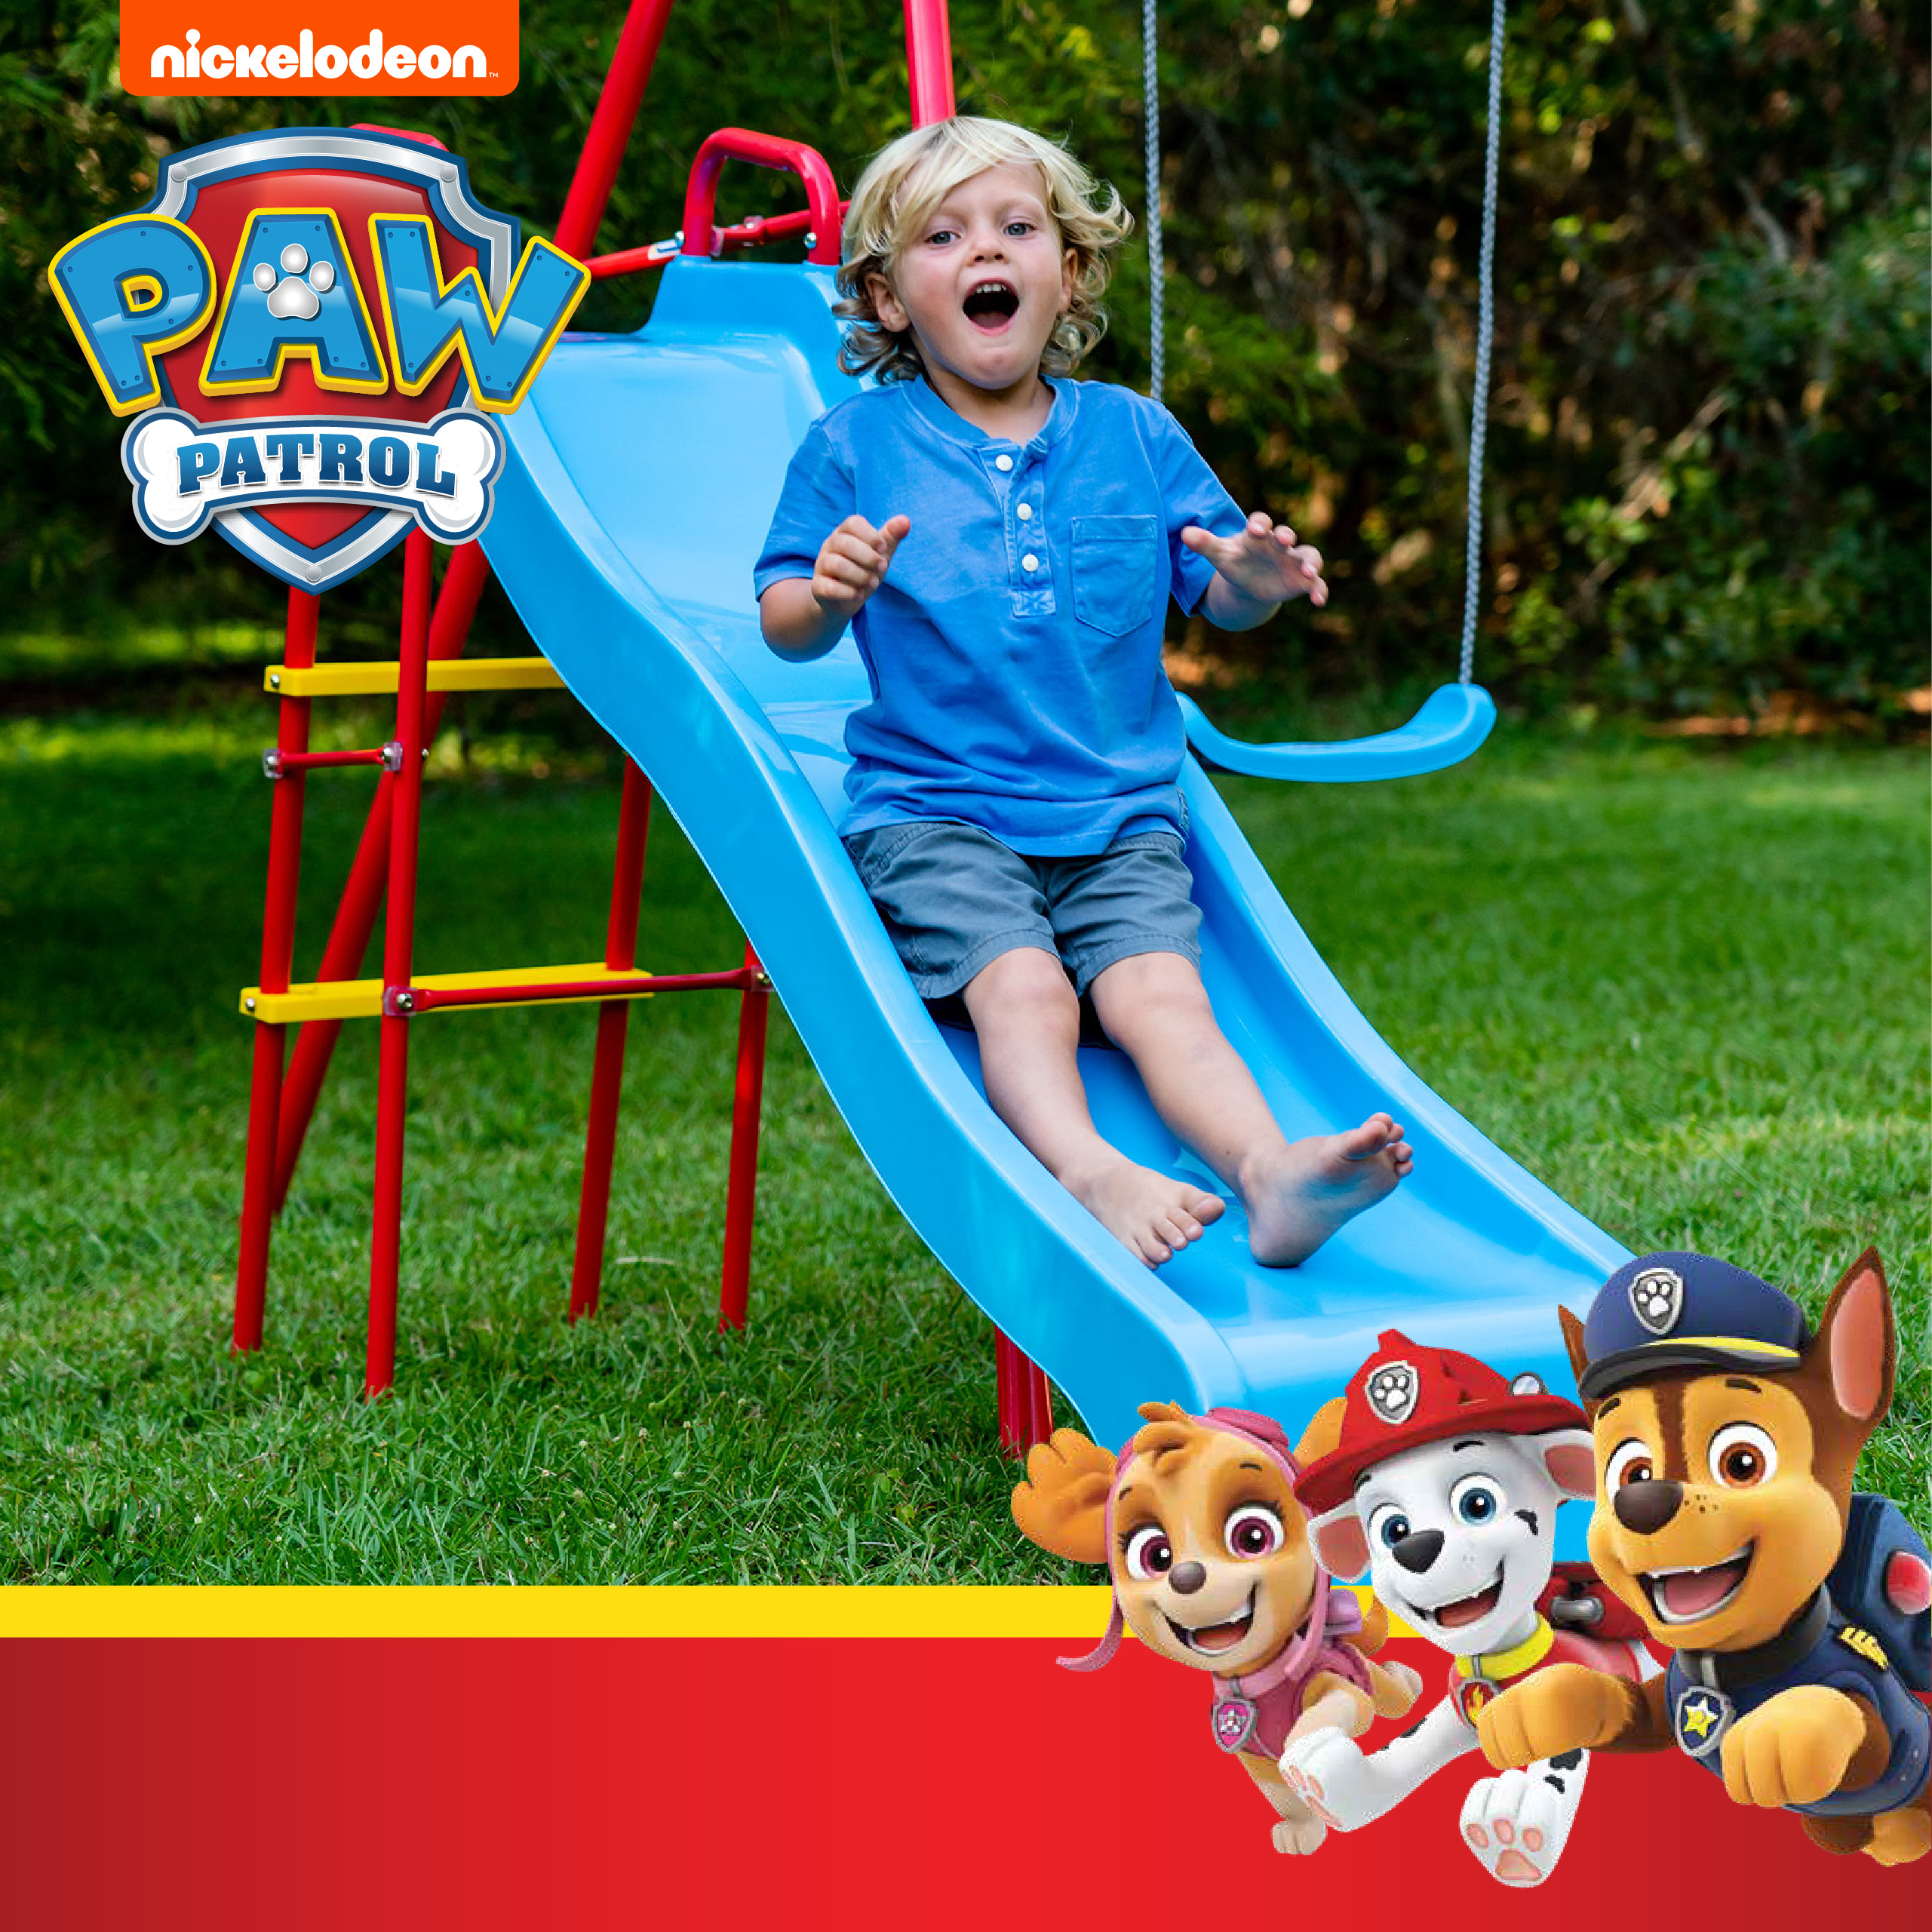 Swurfer Paw Patrol Deluxe Swing Set for Kids, Ages 4 and Up - image 5 of 7